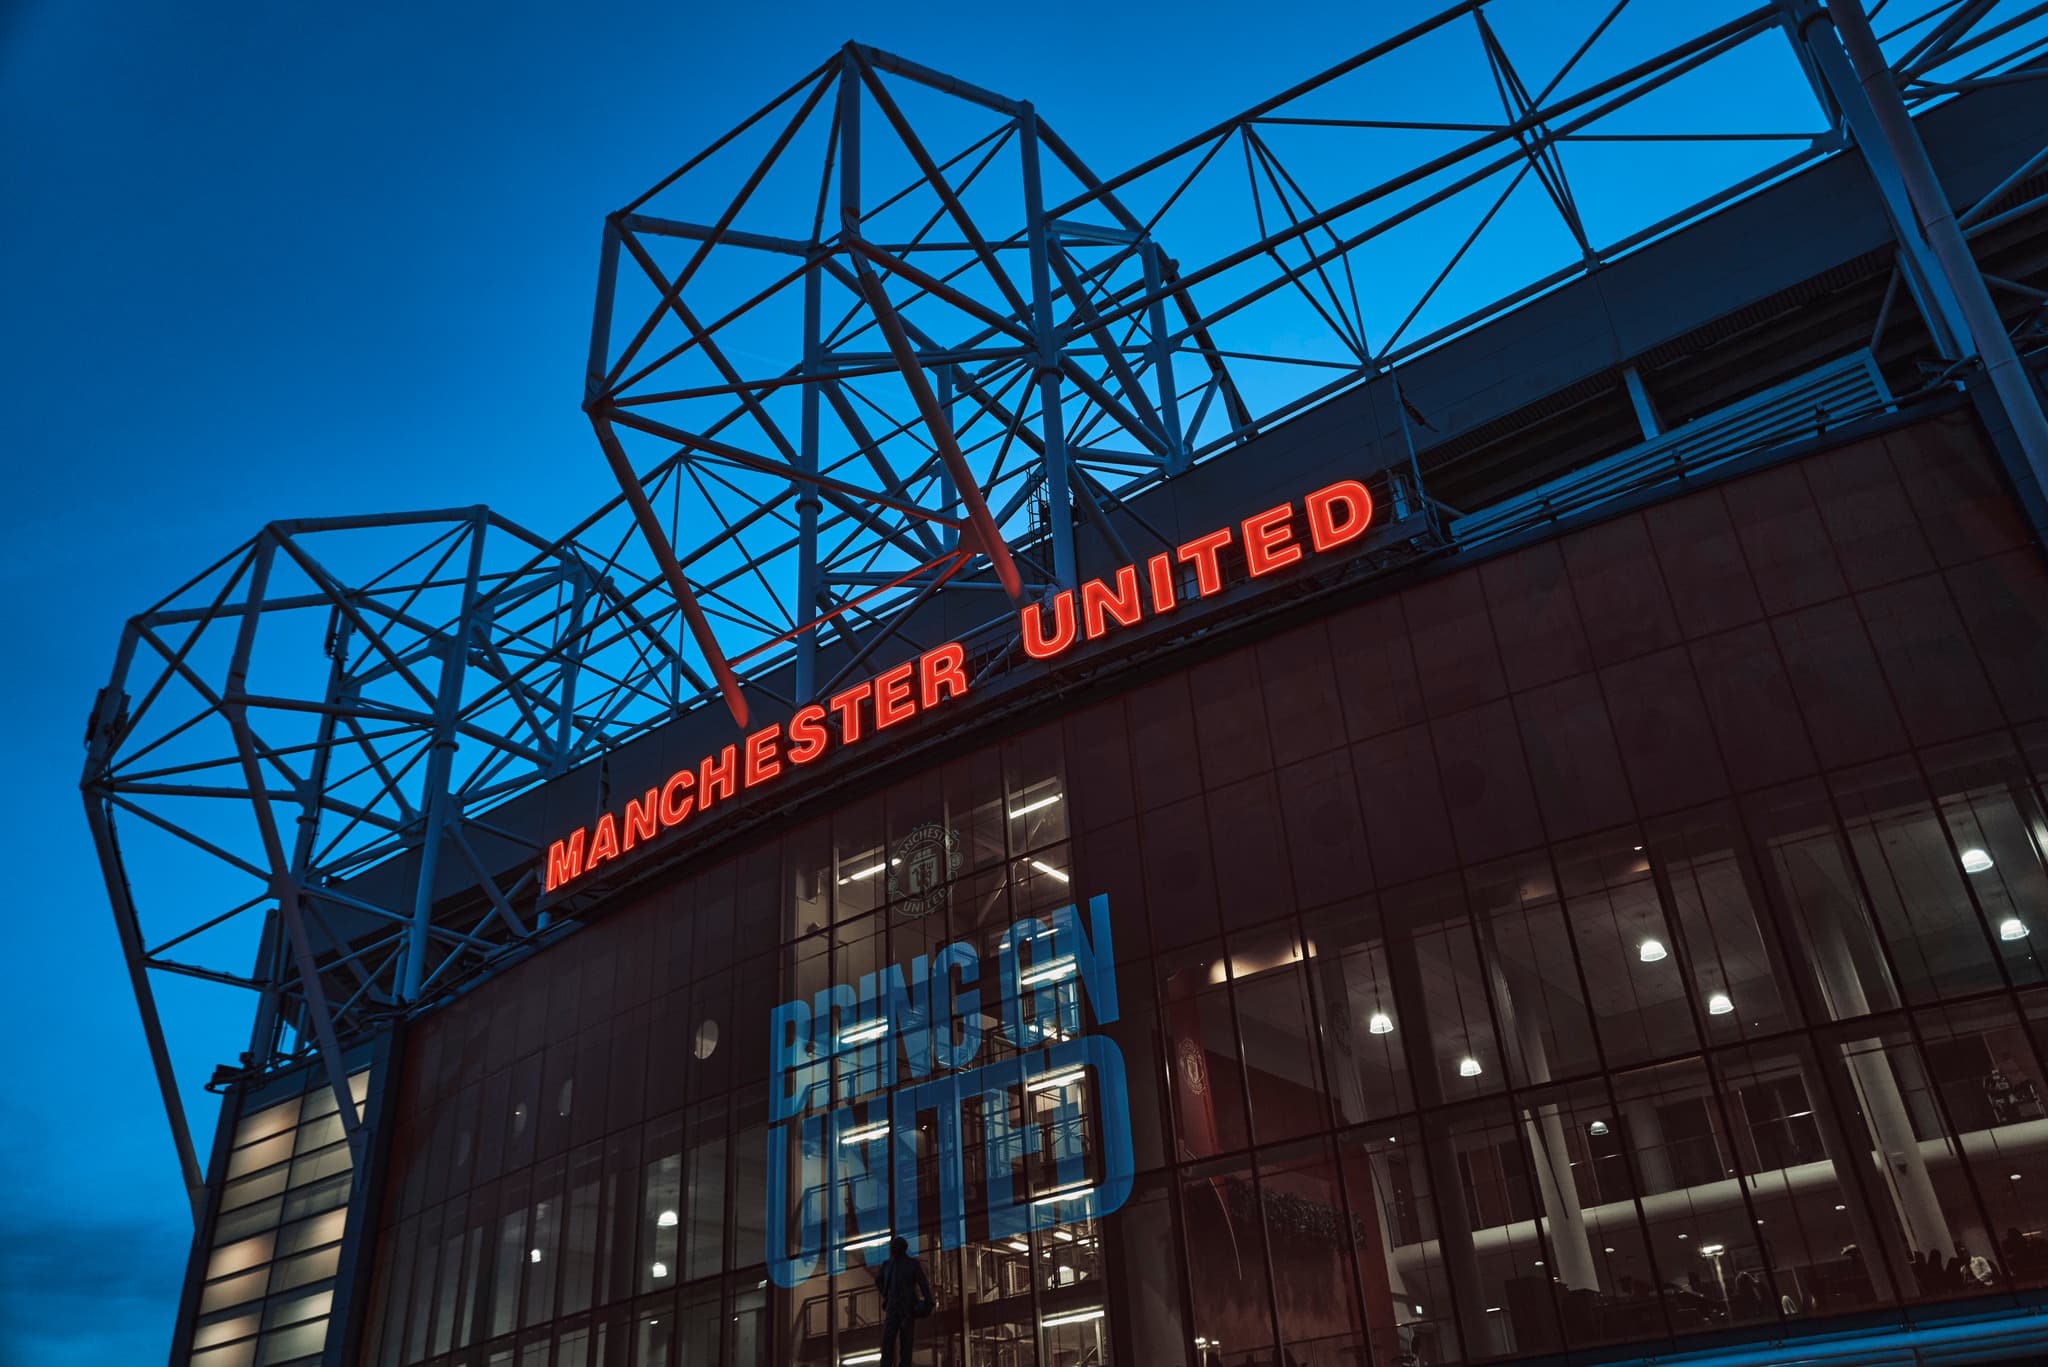 An exterior view of Old Trafford, home of Manchester United FC.